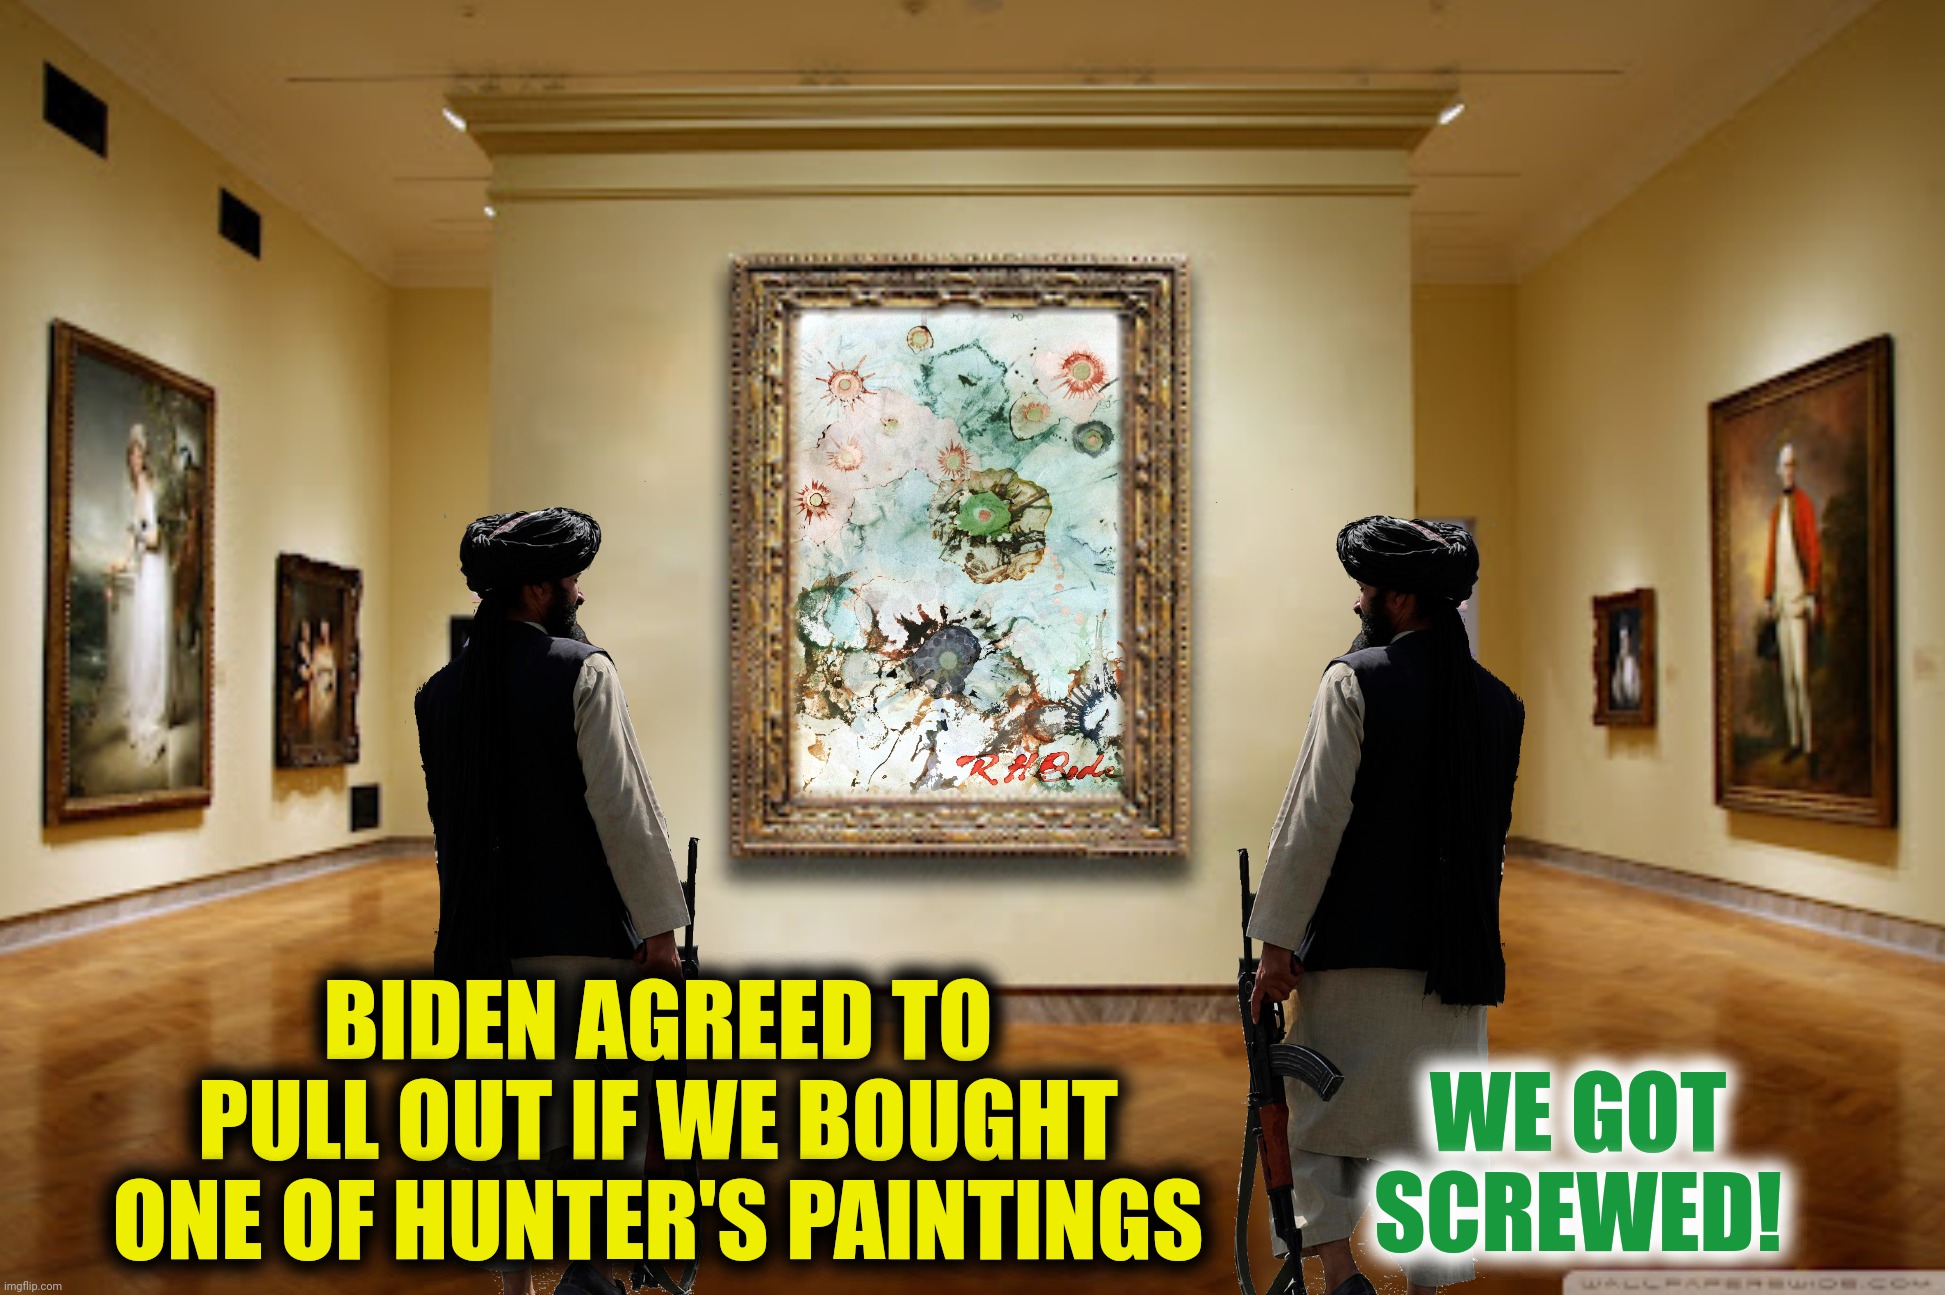 BIDEN AGREED TO PULL OUT IF WE BOUGHT ONE OF HUNTER'S PAINTINGS WE GOT SCREWED! | made w/ Imgflip meme maker